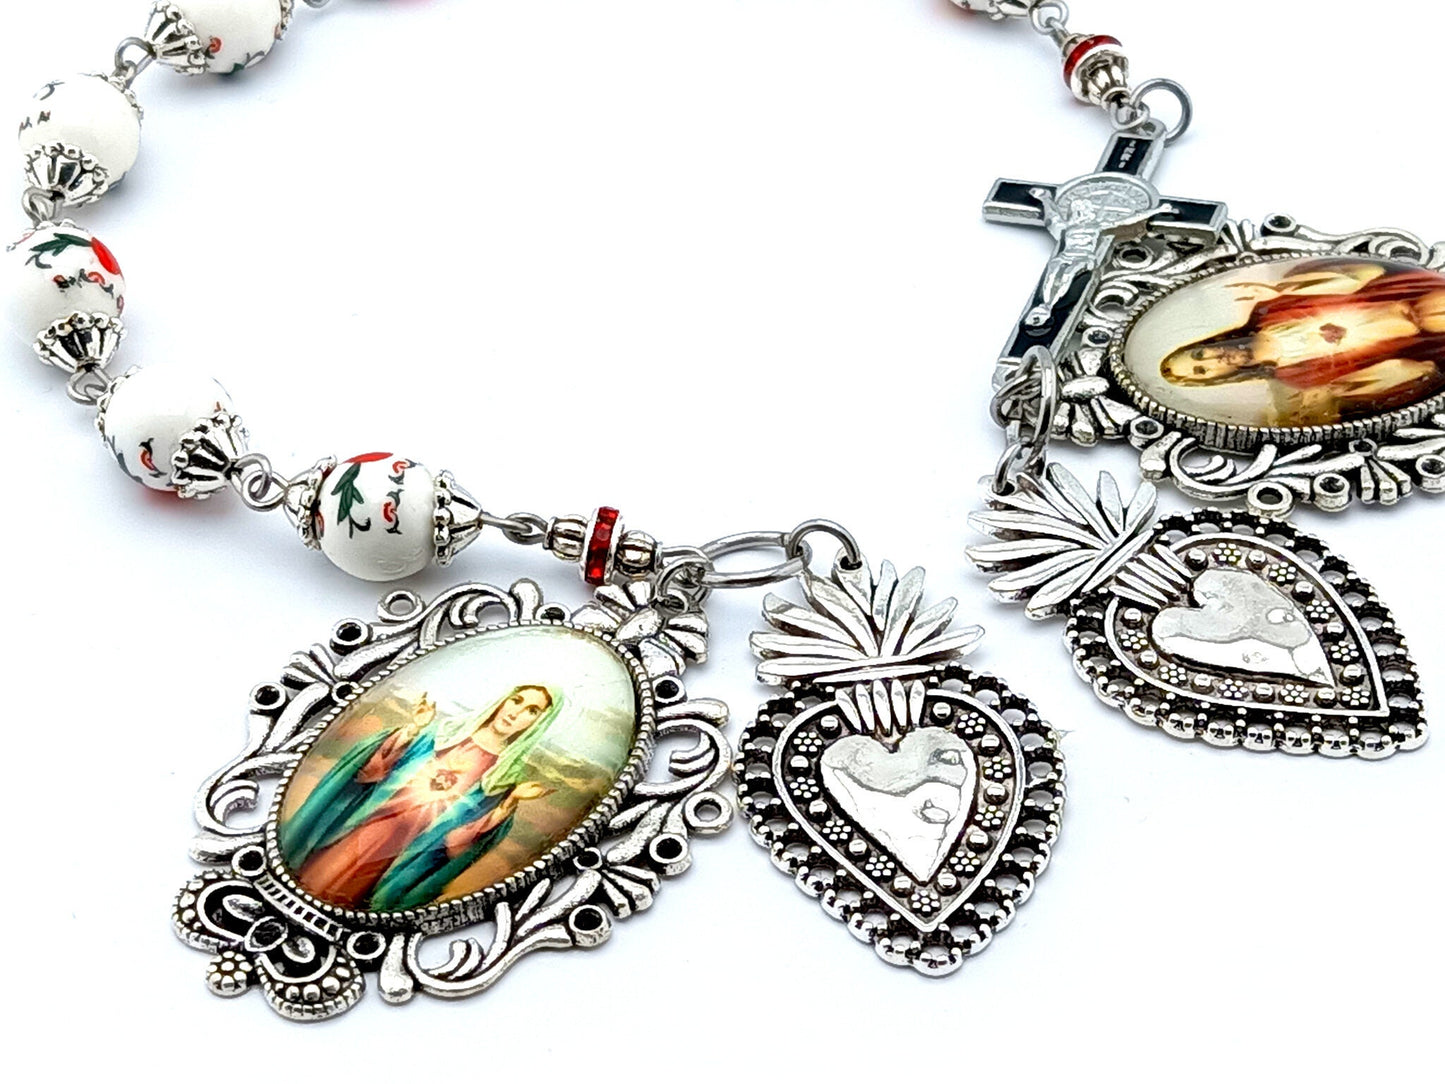 Sacred Heart of Jesus and Immaculate Heart of Mary unique rosary beads prayer chaplet with porcleain beads, silver heart medals and large picture medal.